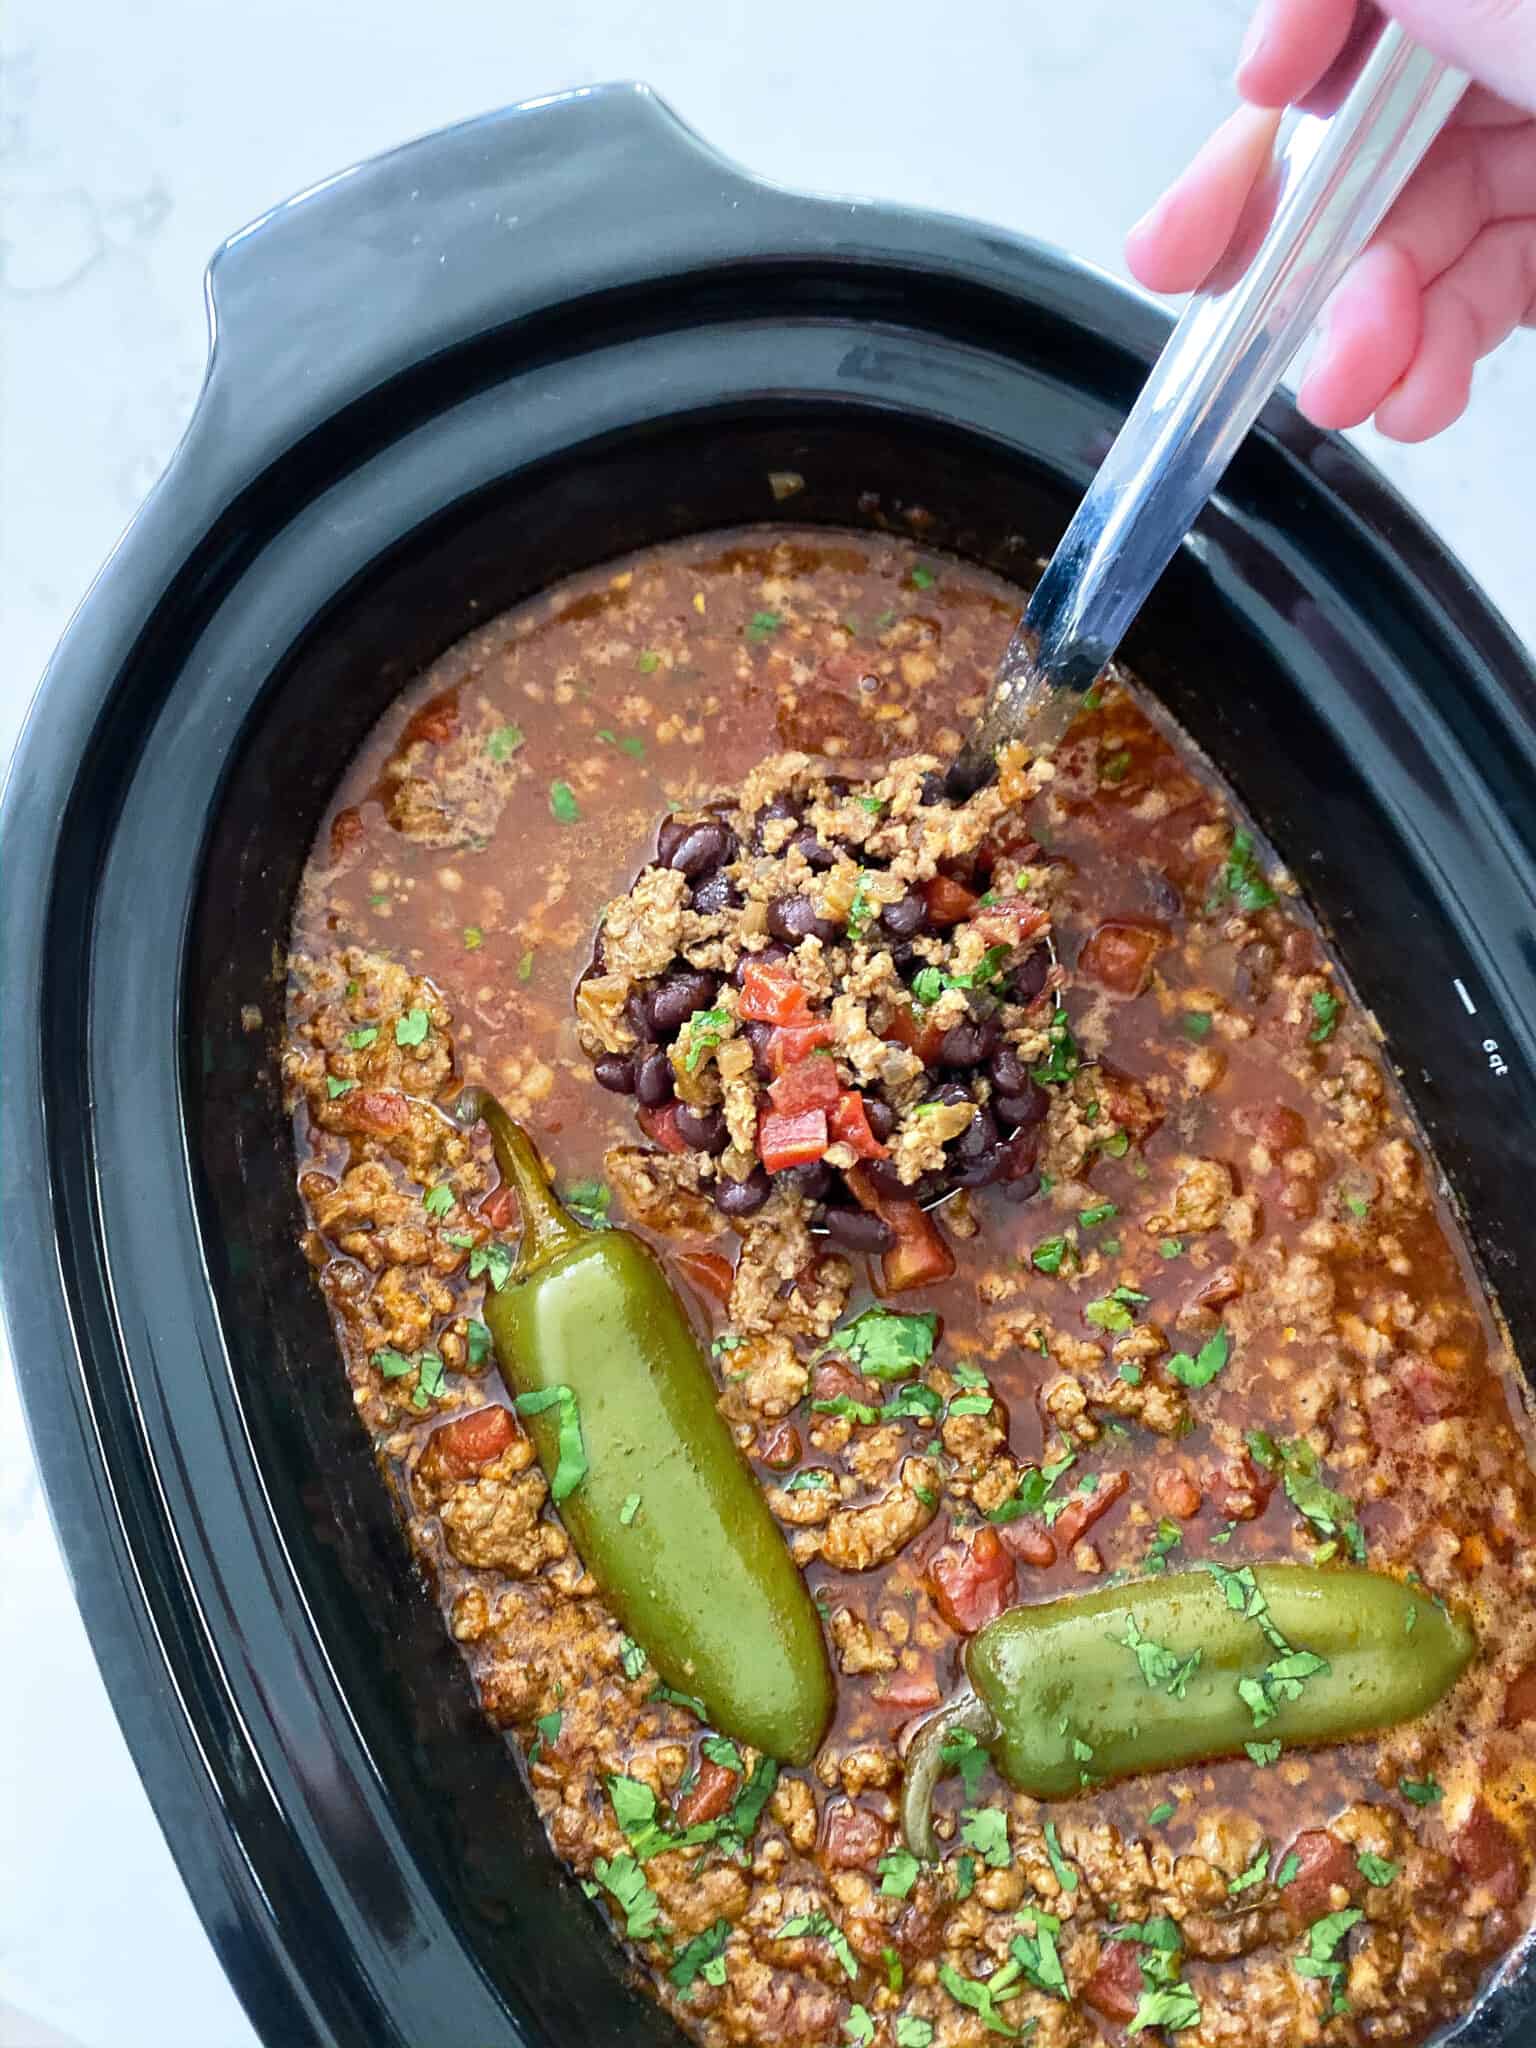 Easy Slow Cooker Chili Recipe | The Best Homemade Chili!